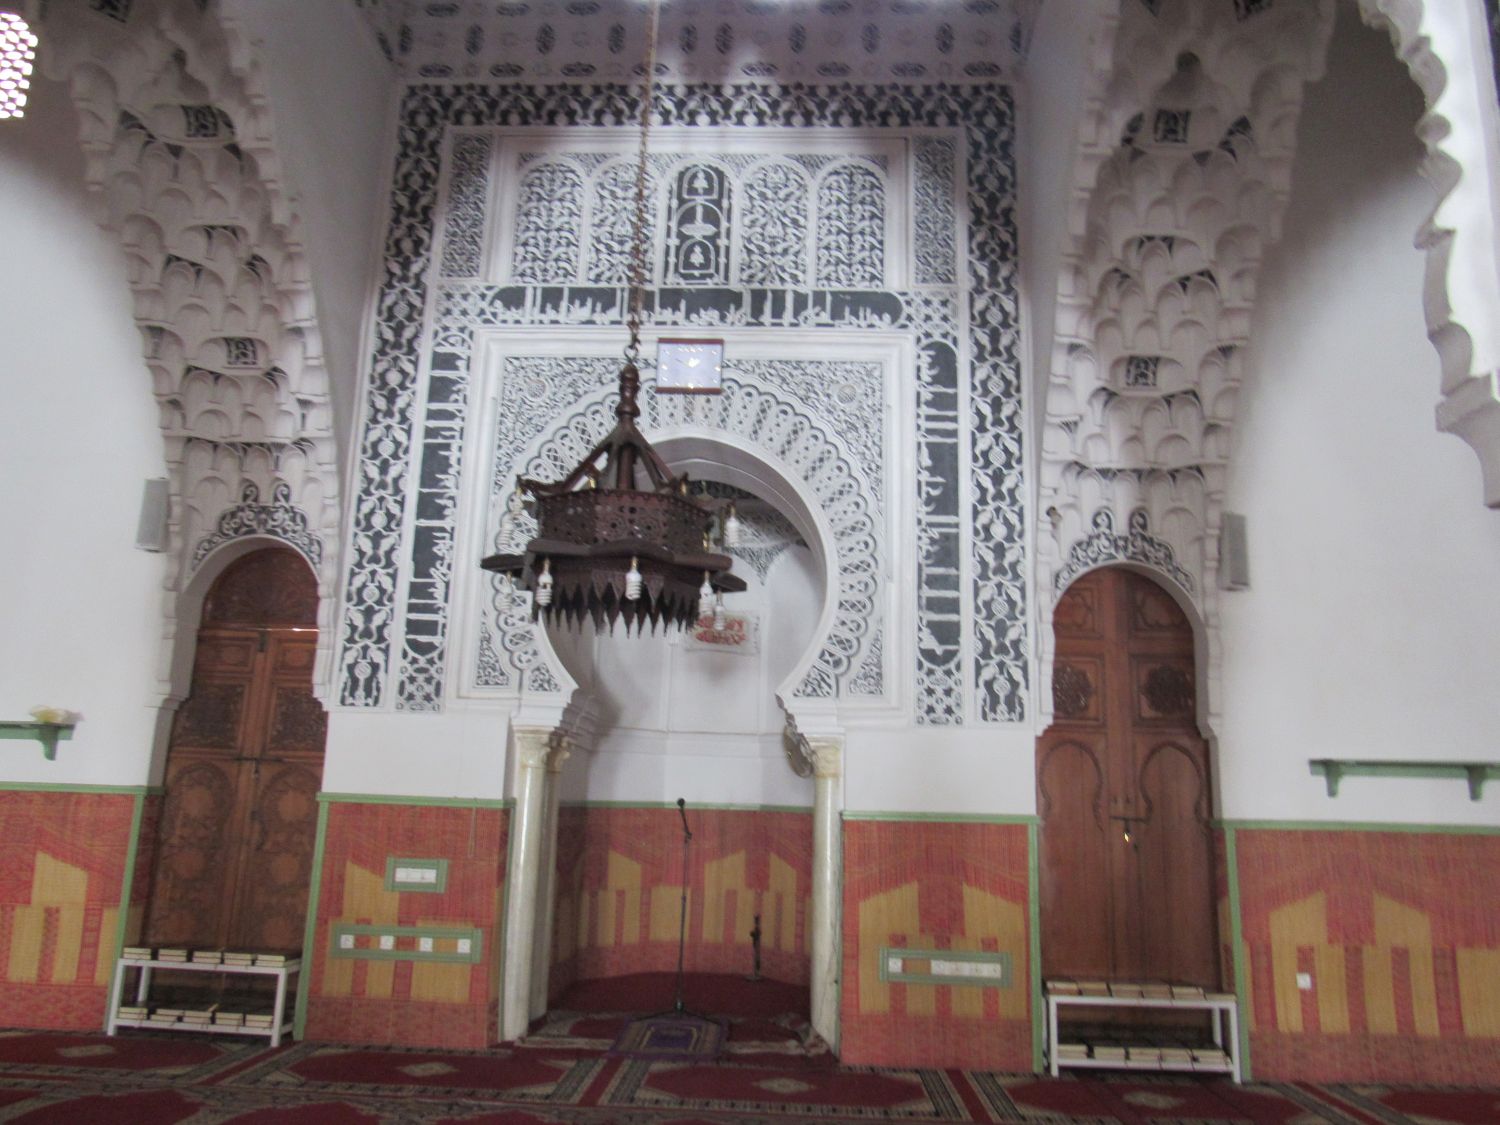 Interior view of the mihrab and qibla wall